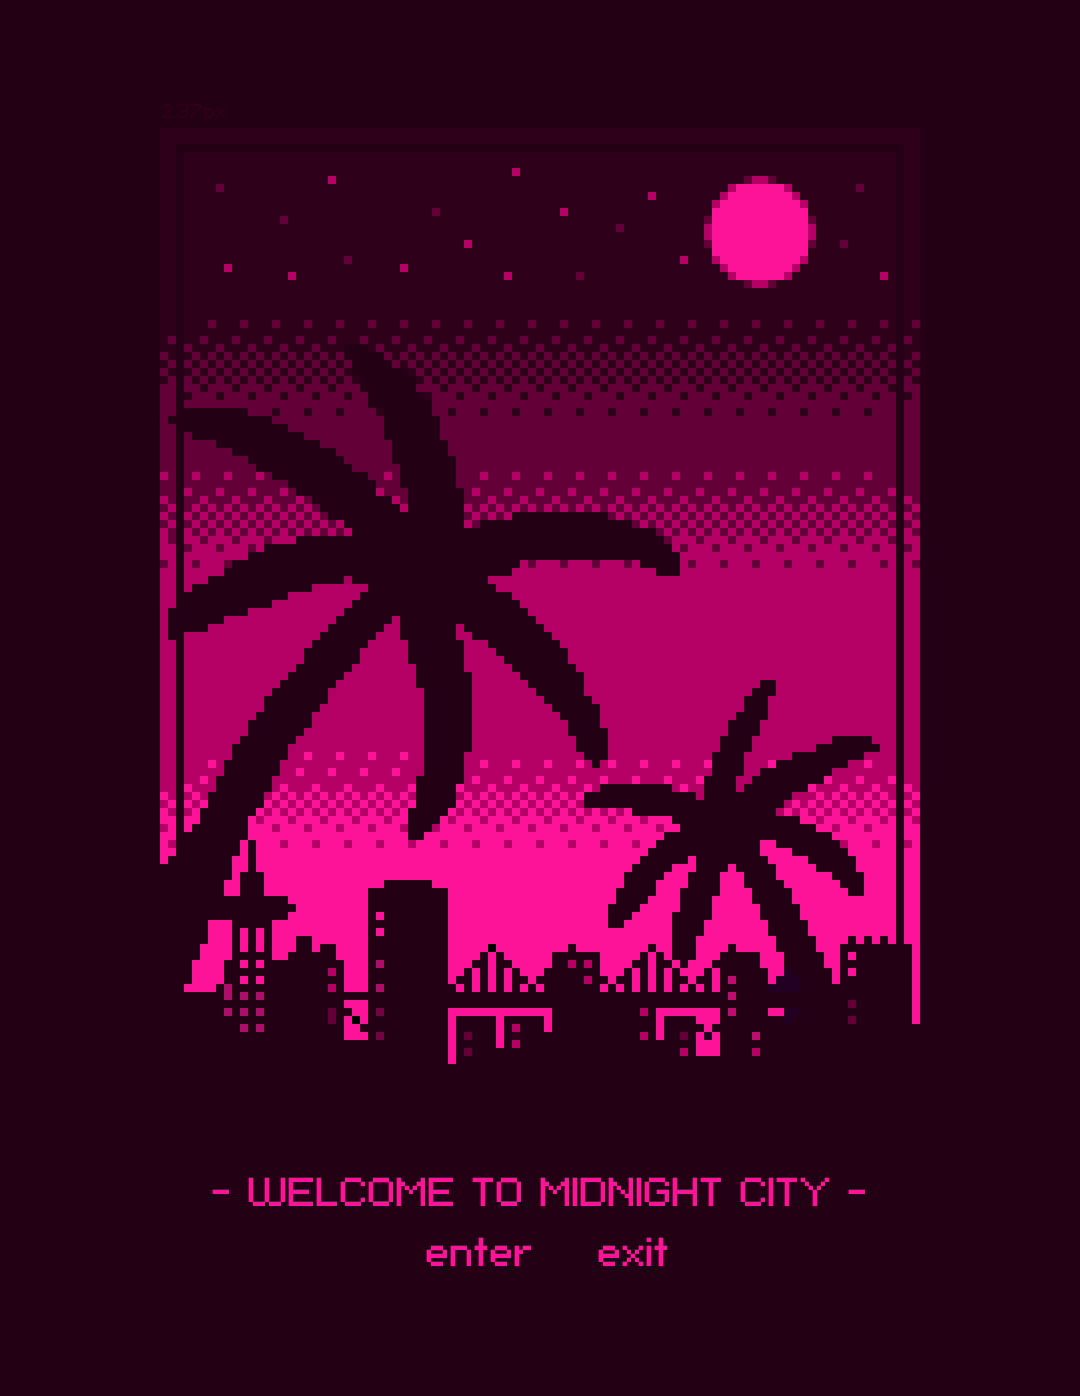 midnight city by 237px — Immediately post your art to a topic and get feedback. Join our new community, EatSleepDraw Studio, today!